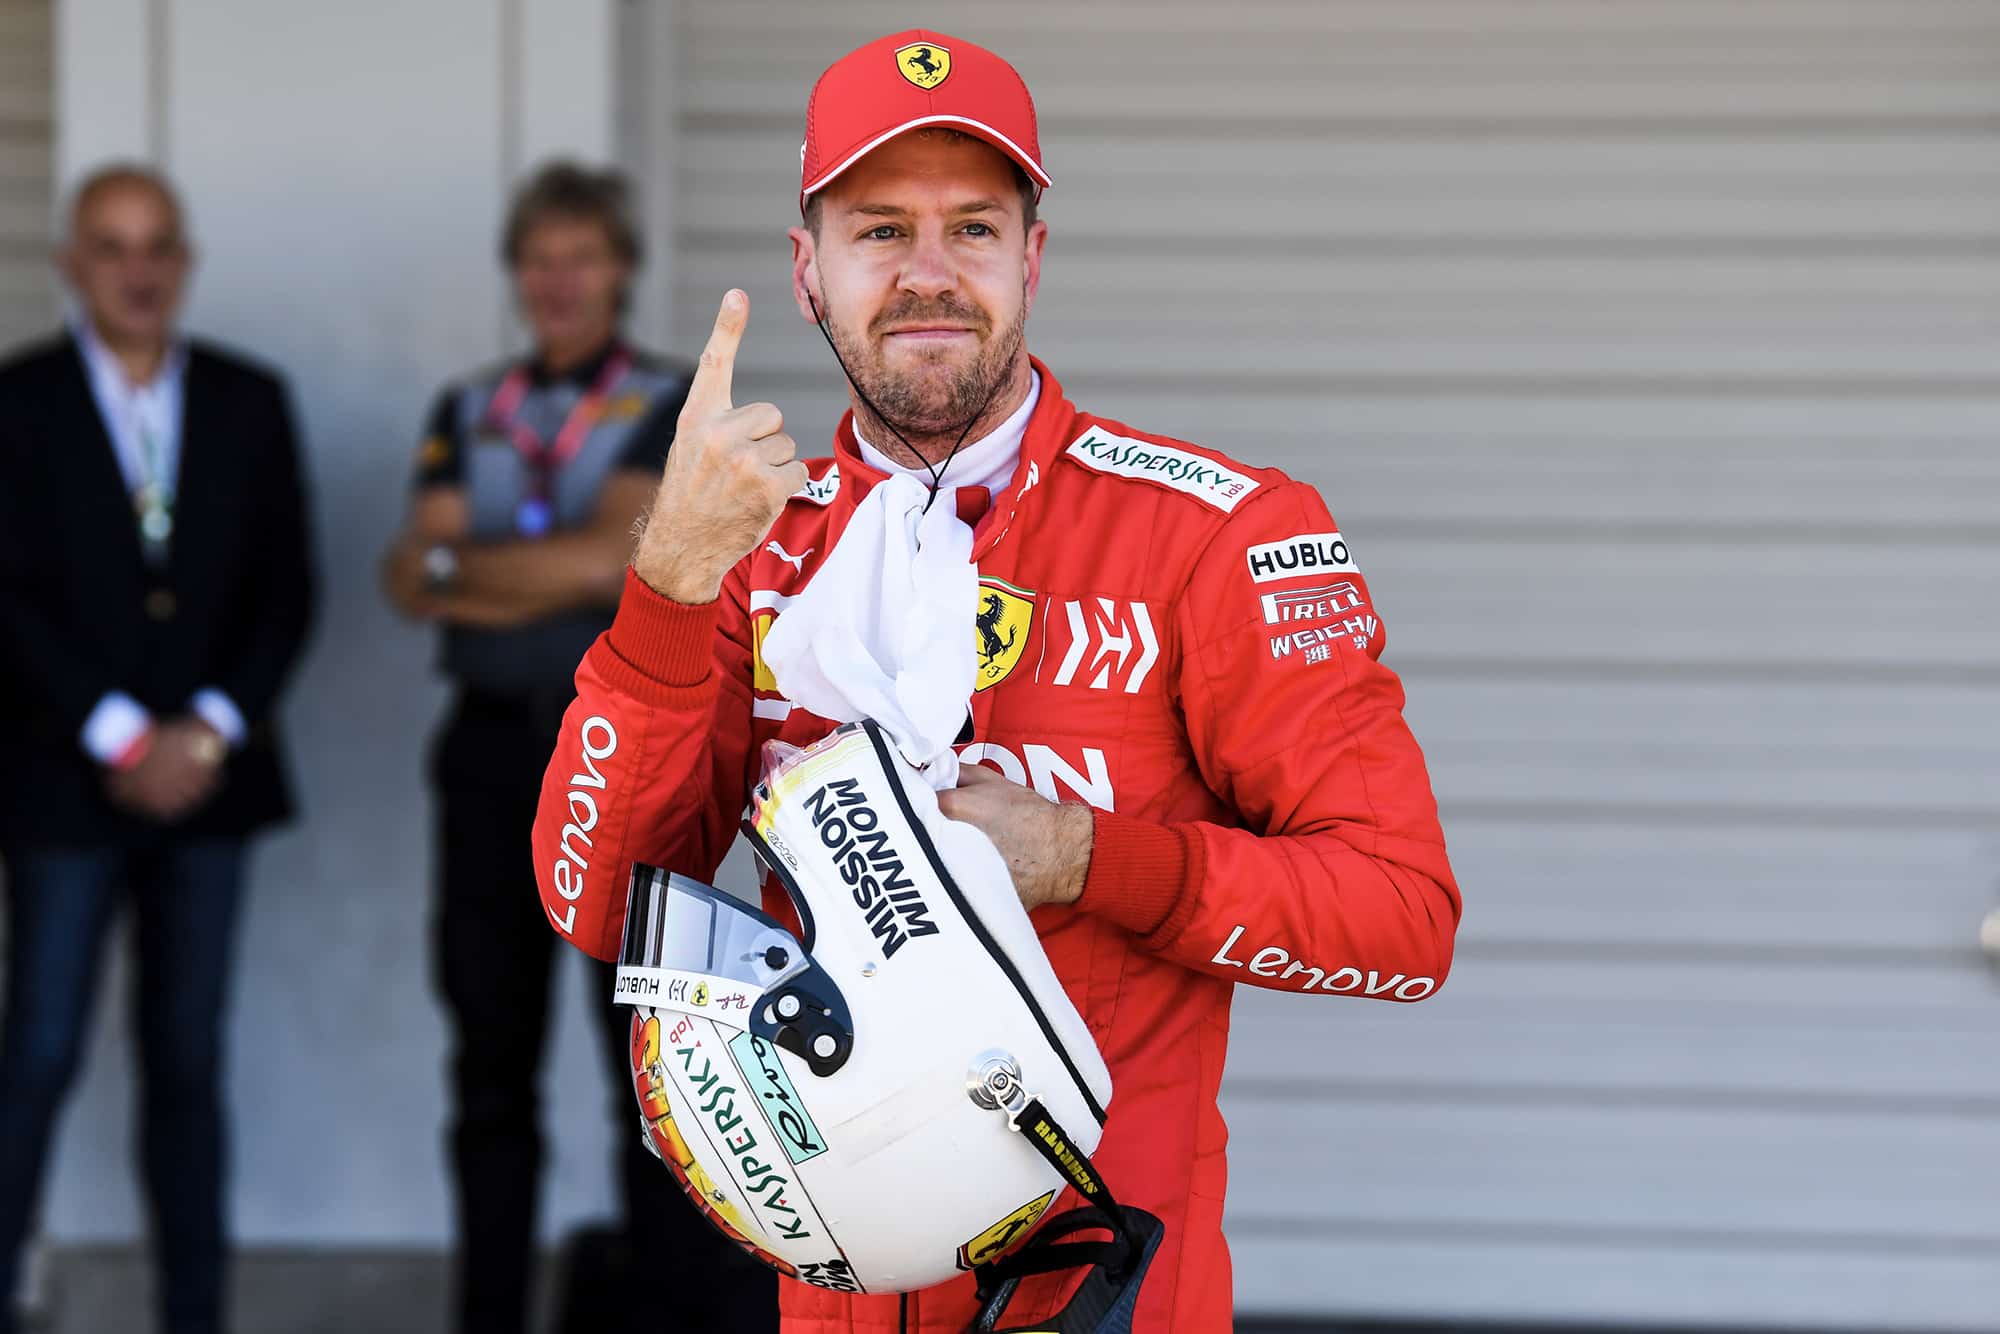 Sebastian Vettel makes the number one sign after qualifying on pole for the 2019 F1 Japanese Grand Prix